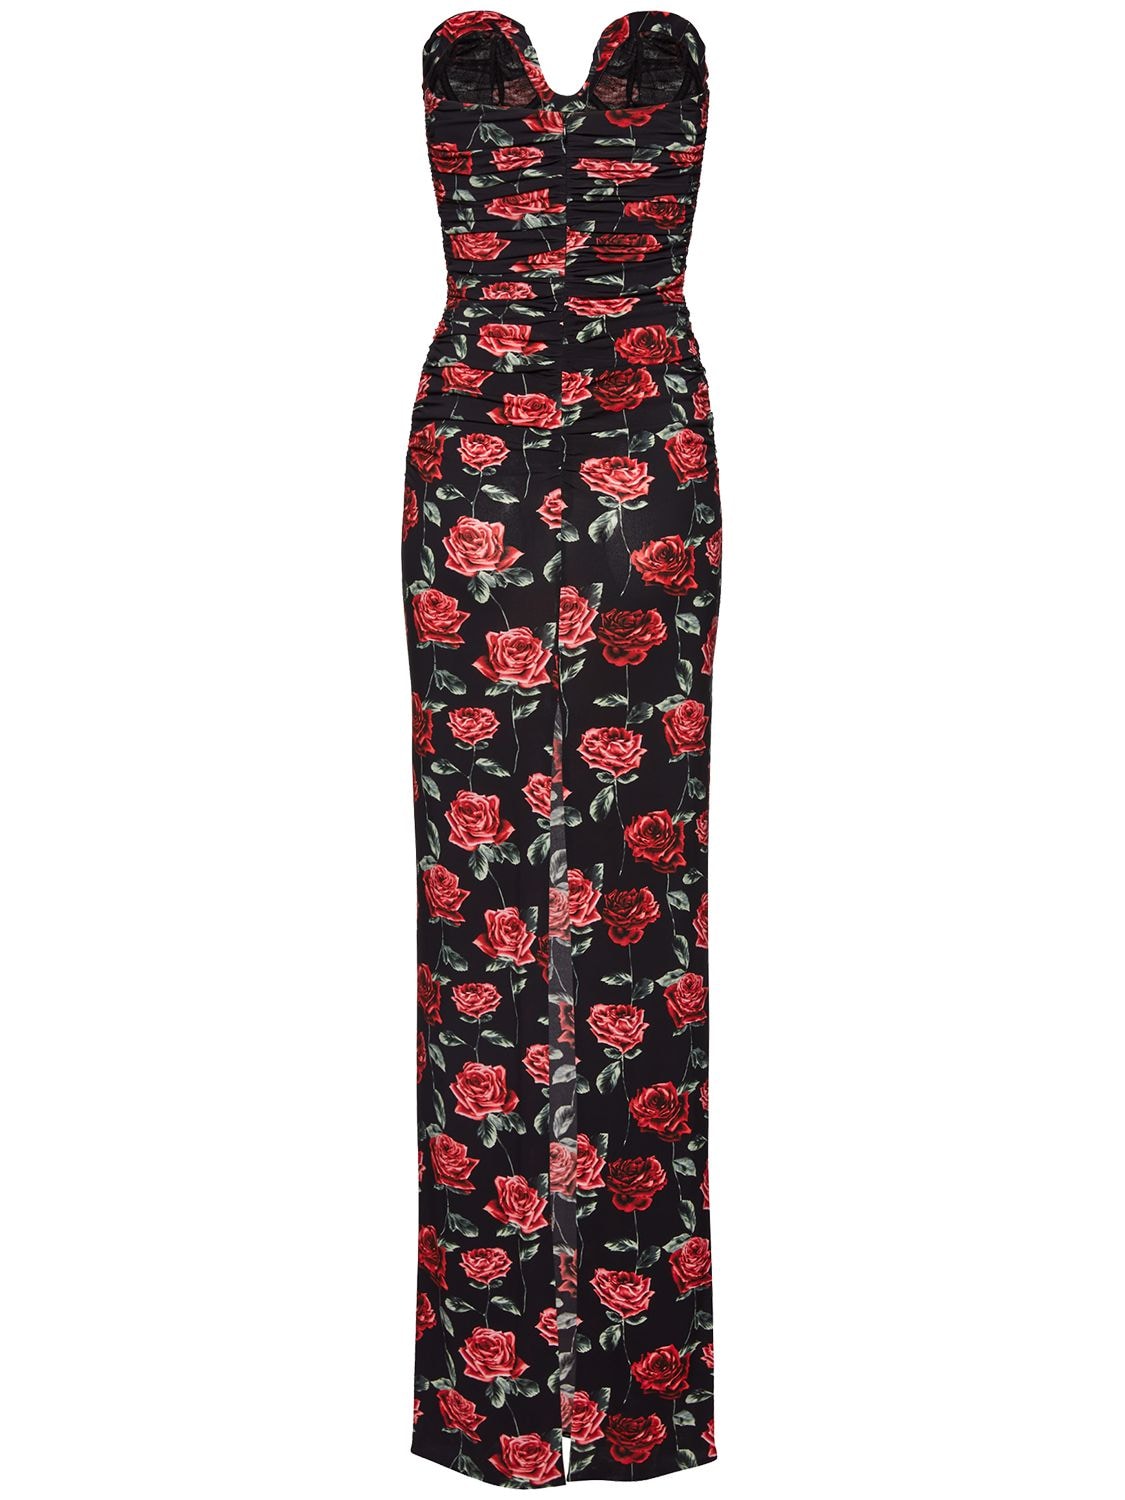 MAGDA BUTRYM ROSE PRINTED JERSEY GOWN